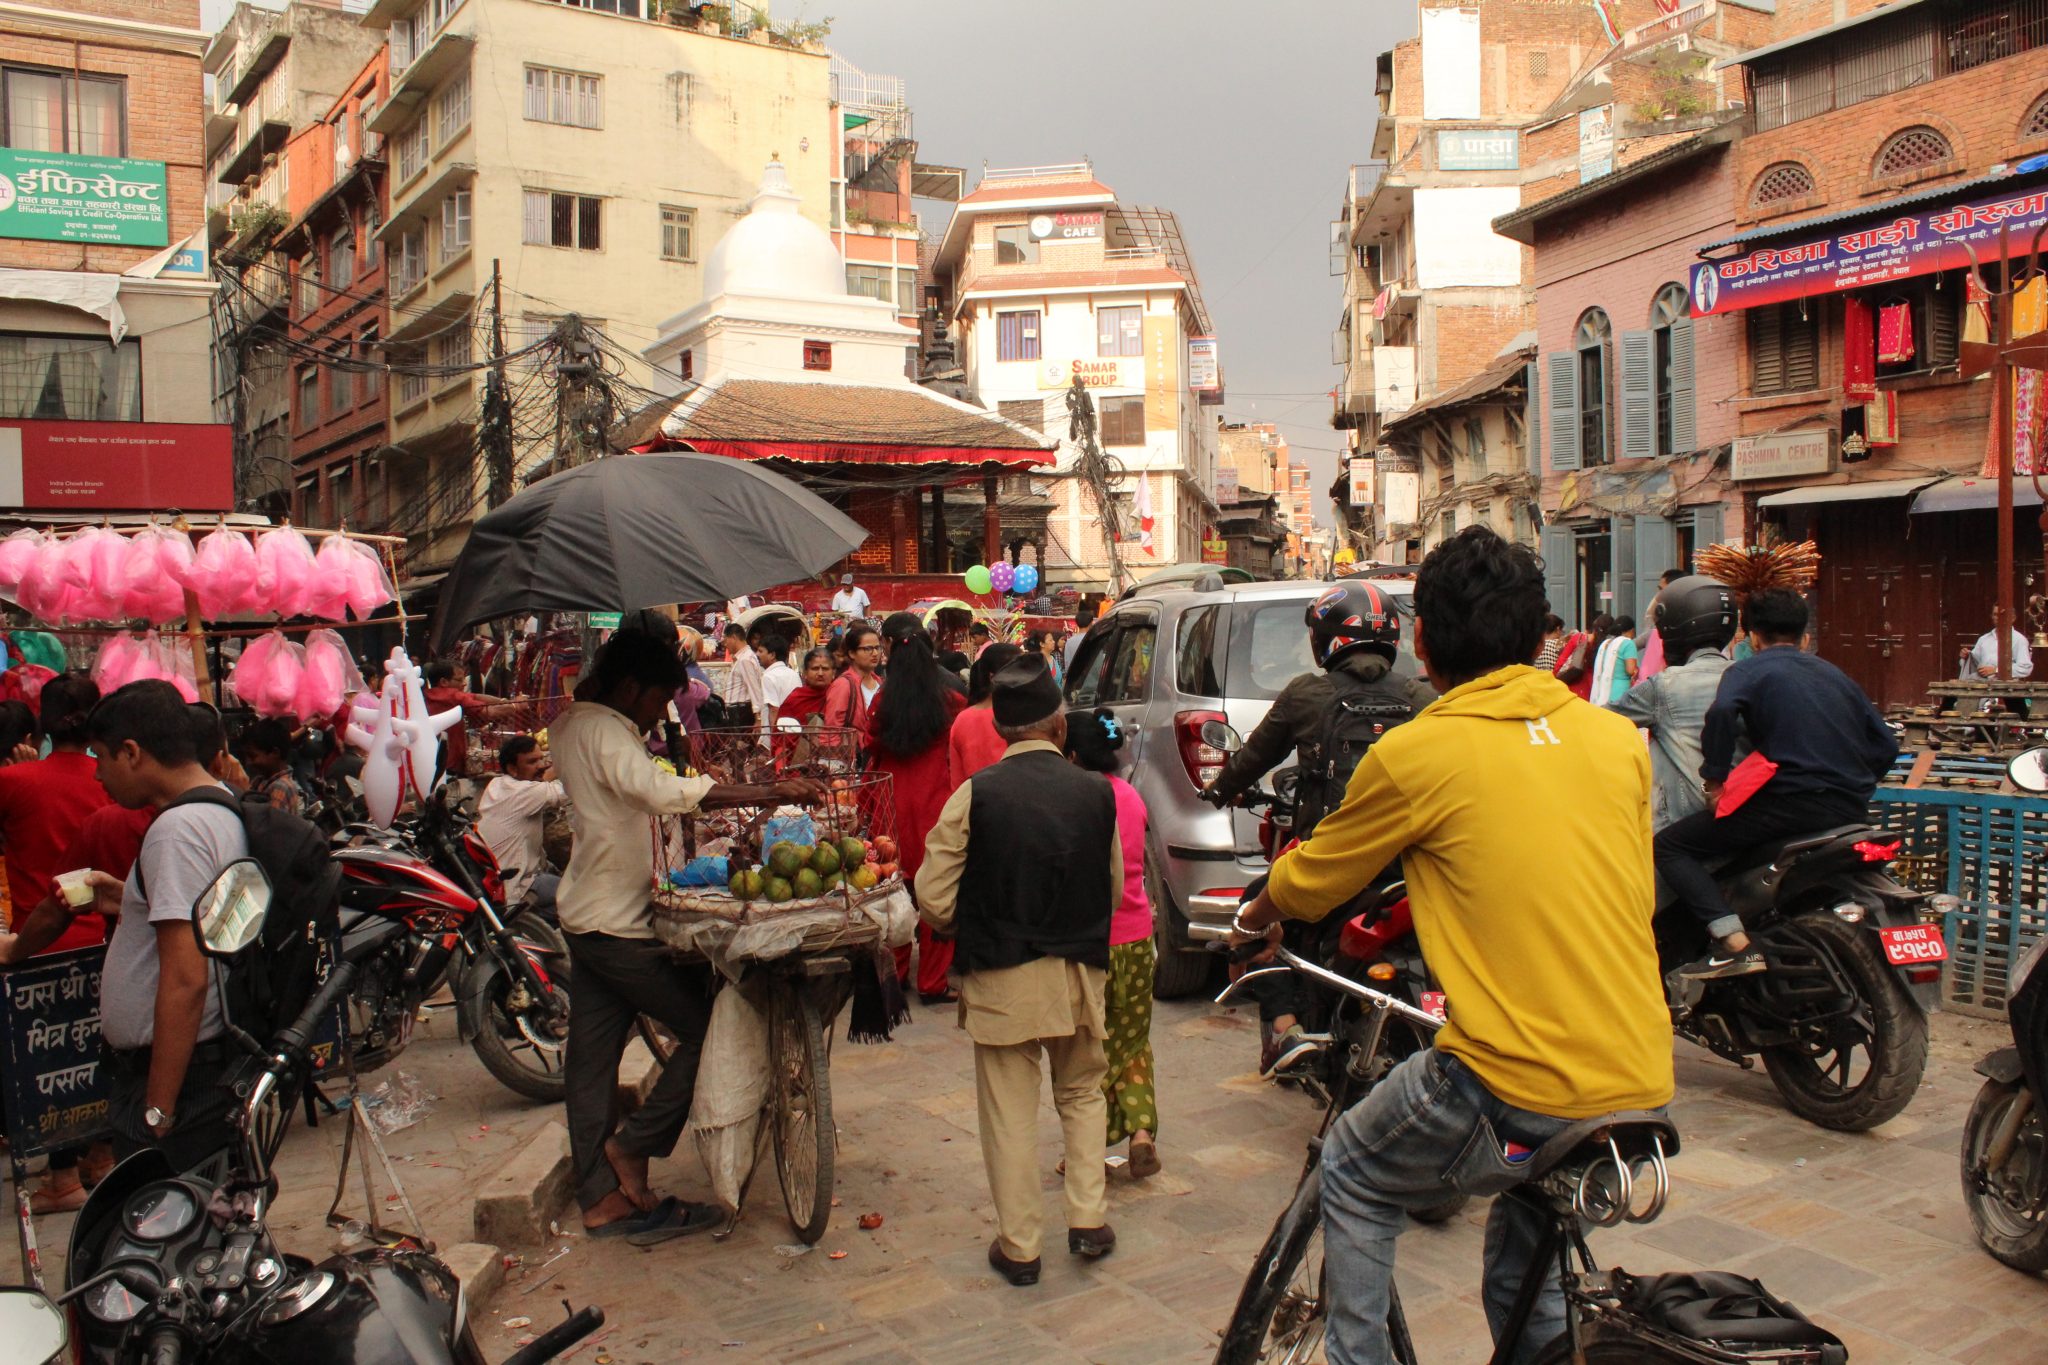 In the center of the Kathmandu, everyone vies for space.